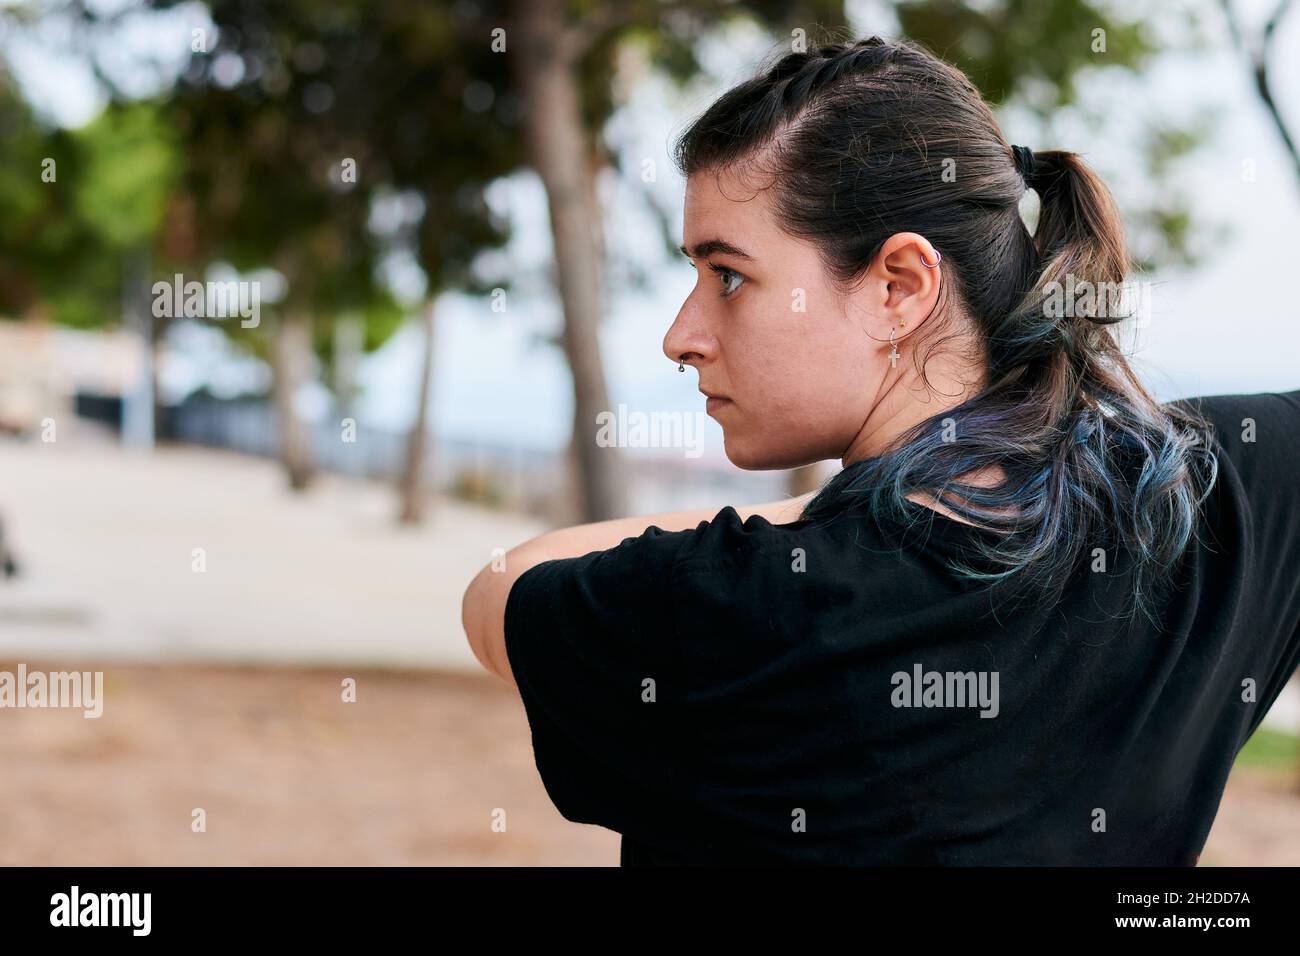 Portrait of a woman training martial arts in a park Stock Photo